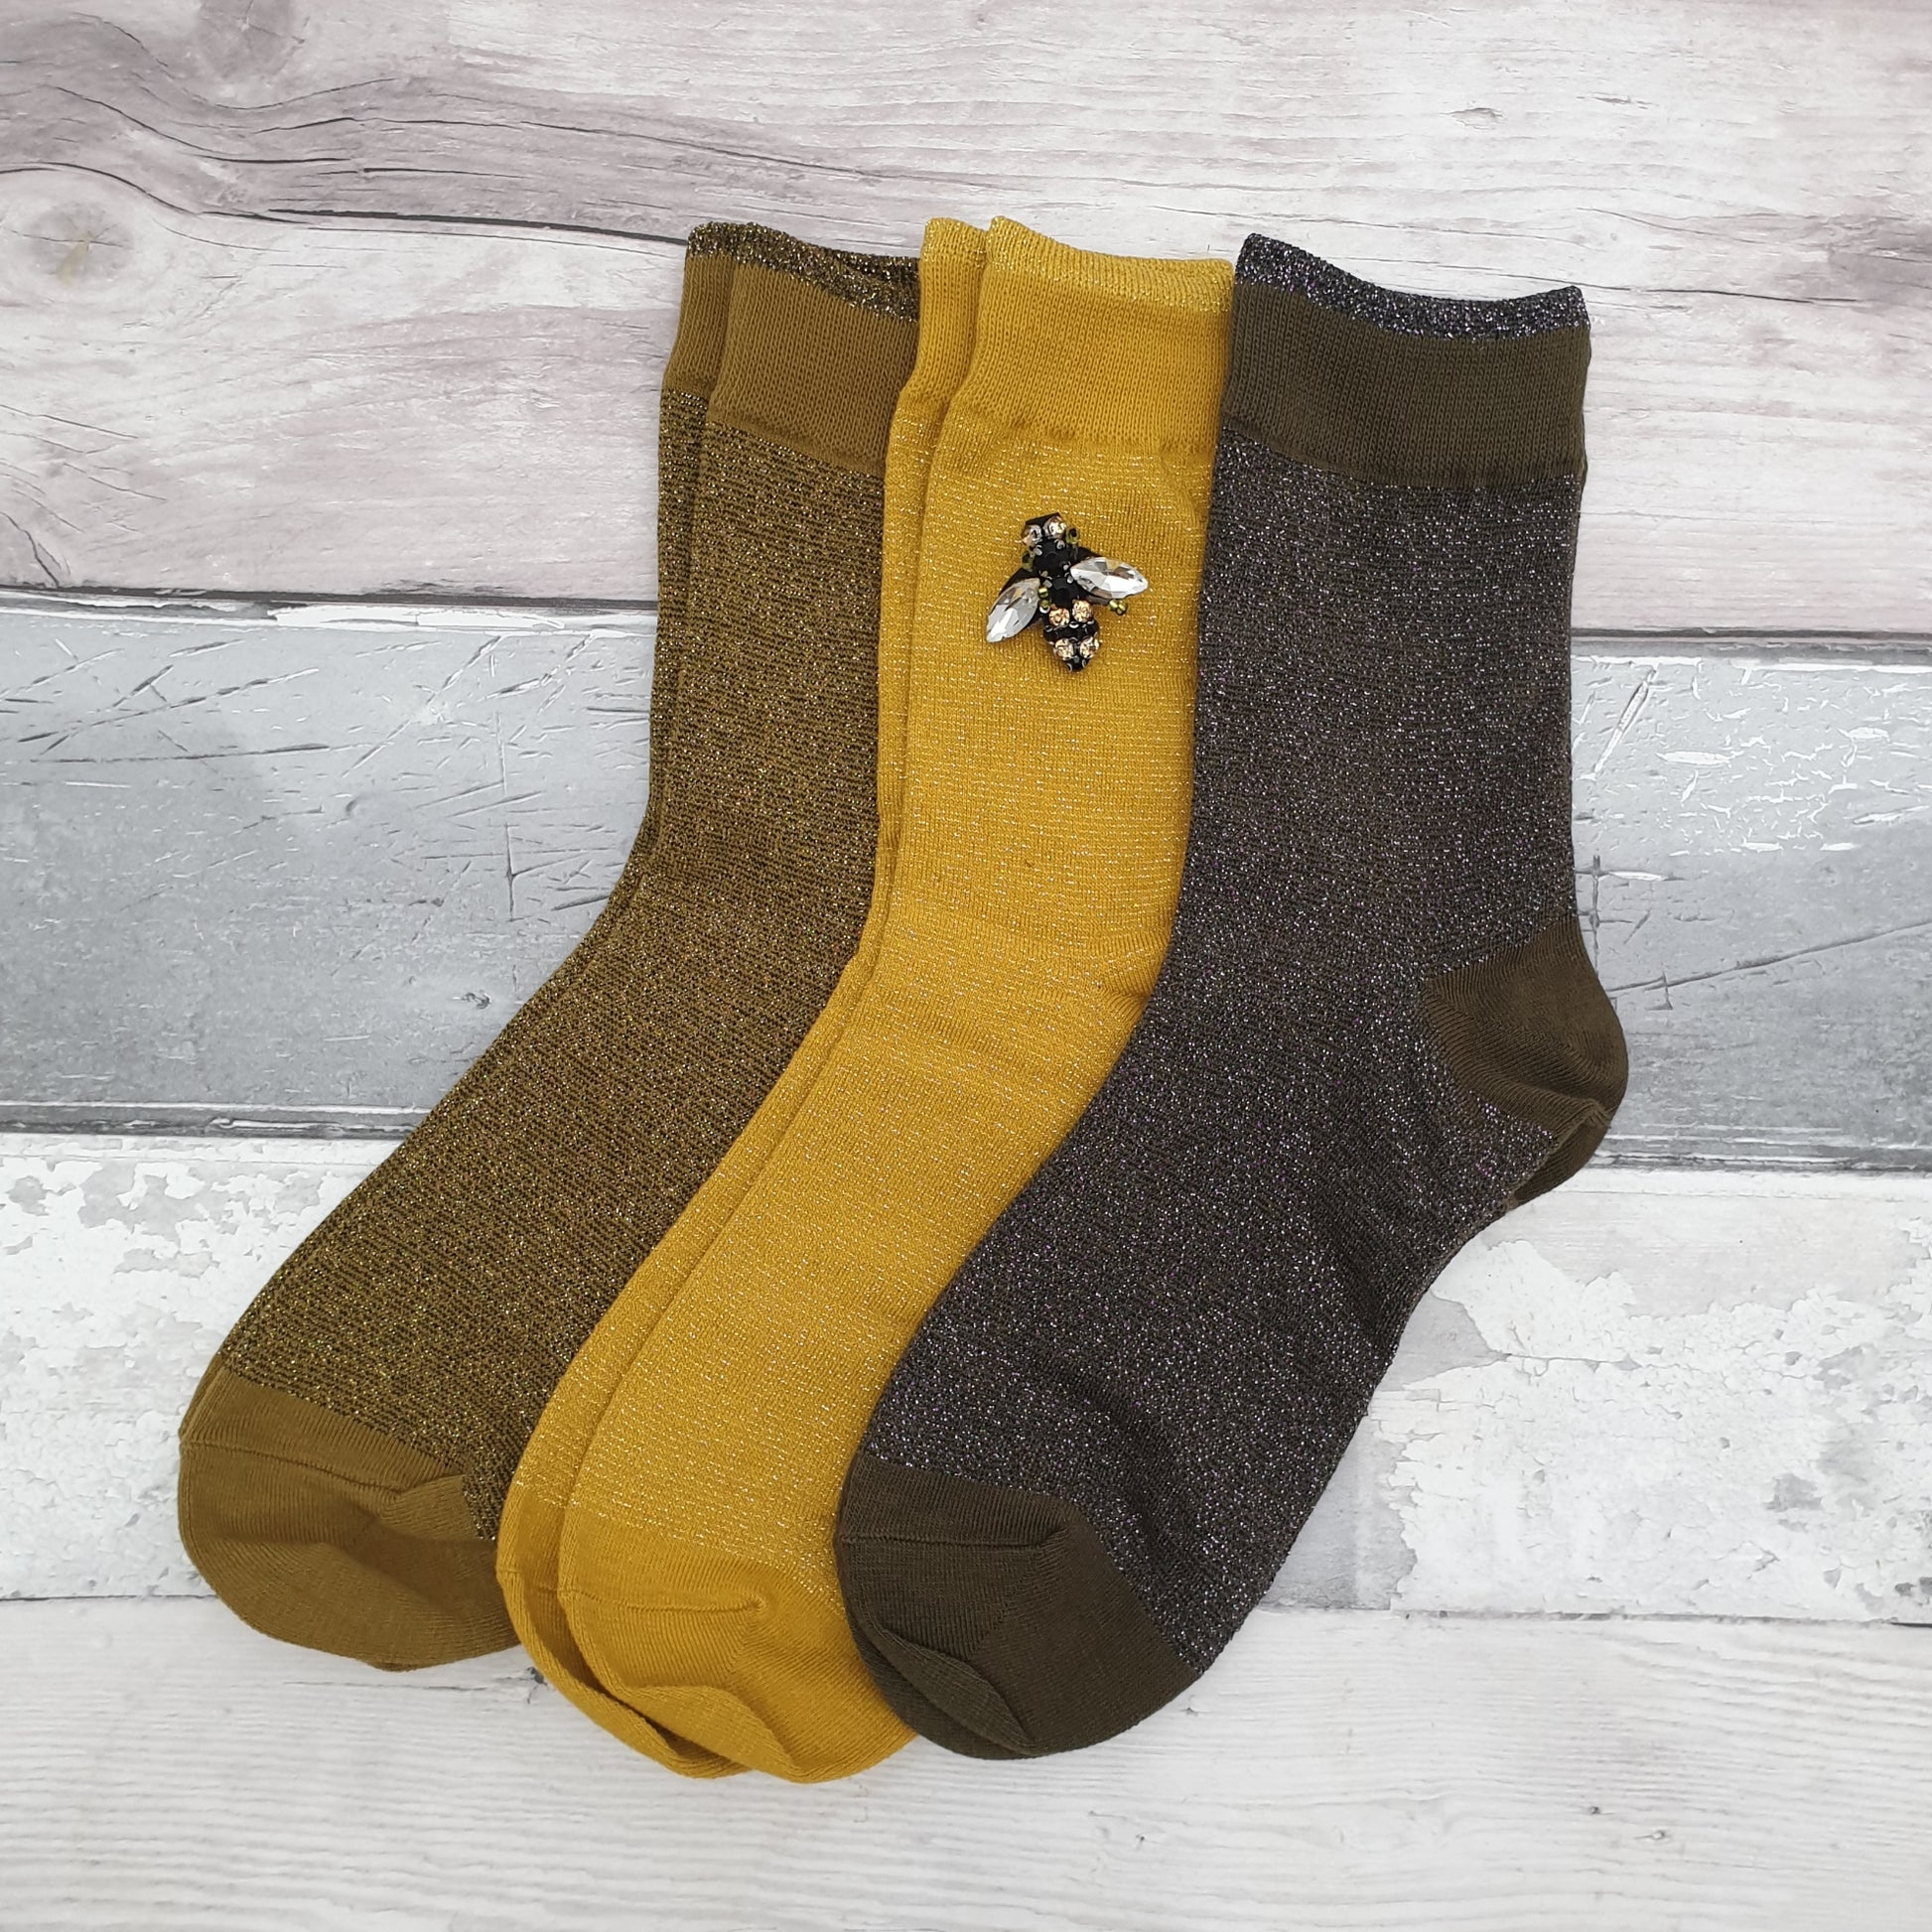 3 Pairs of Sparkly socks in Yellow, Olive and Pewter with a Glass Bee Brooch.